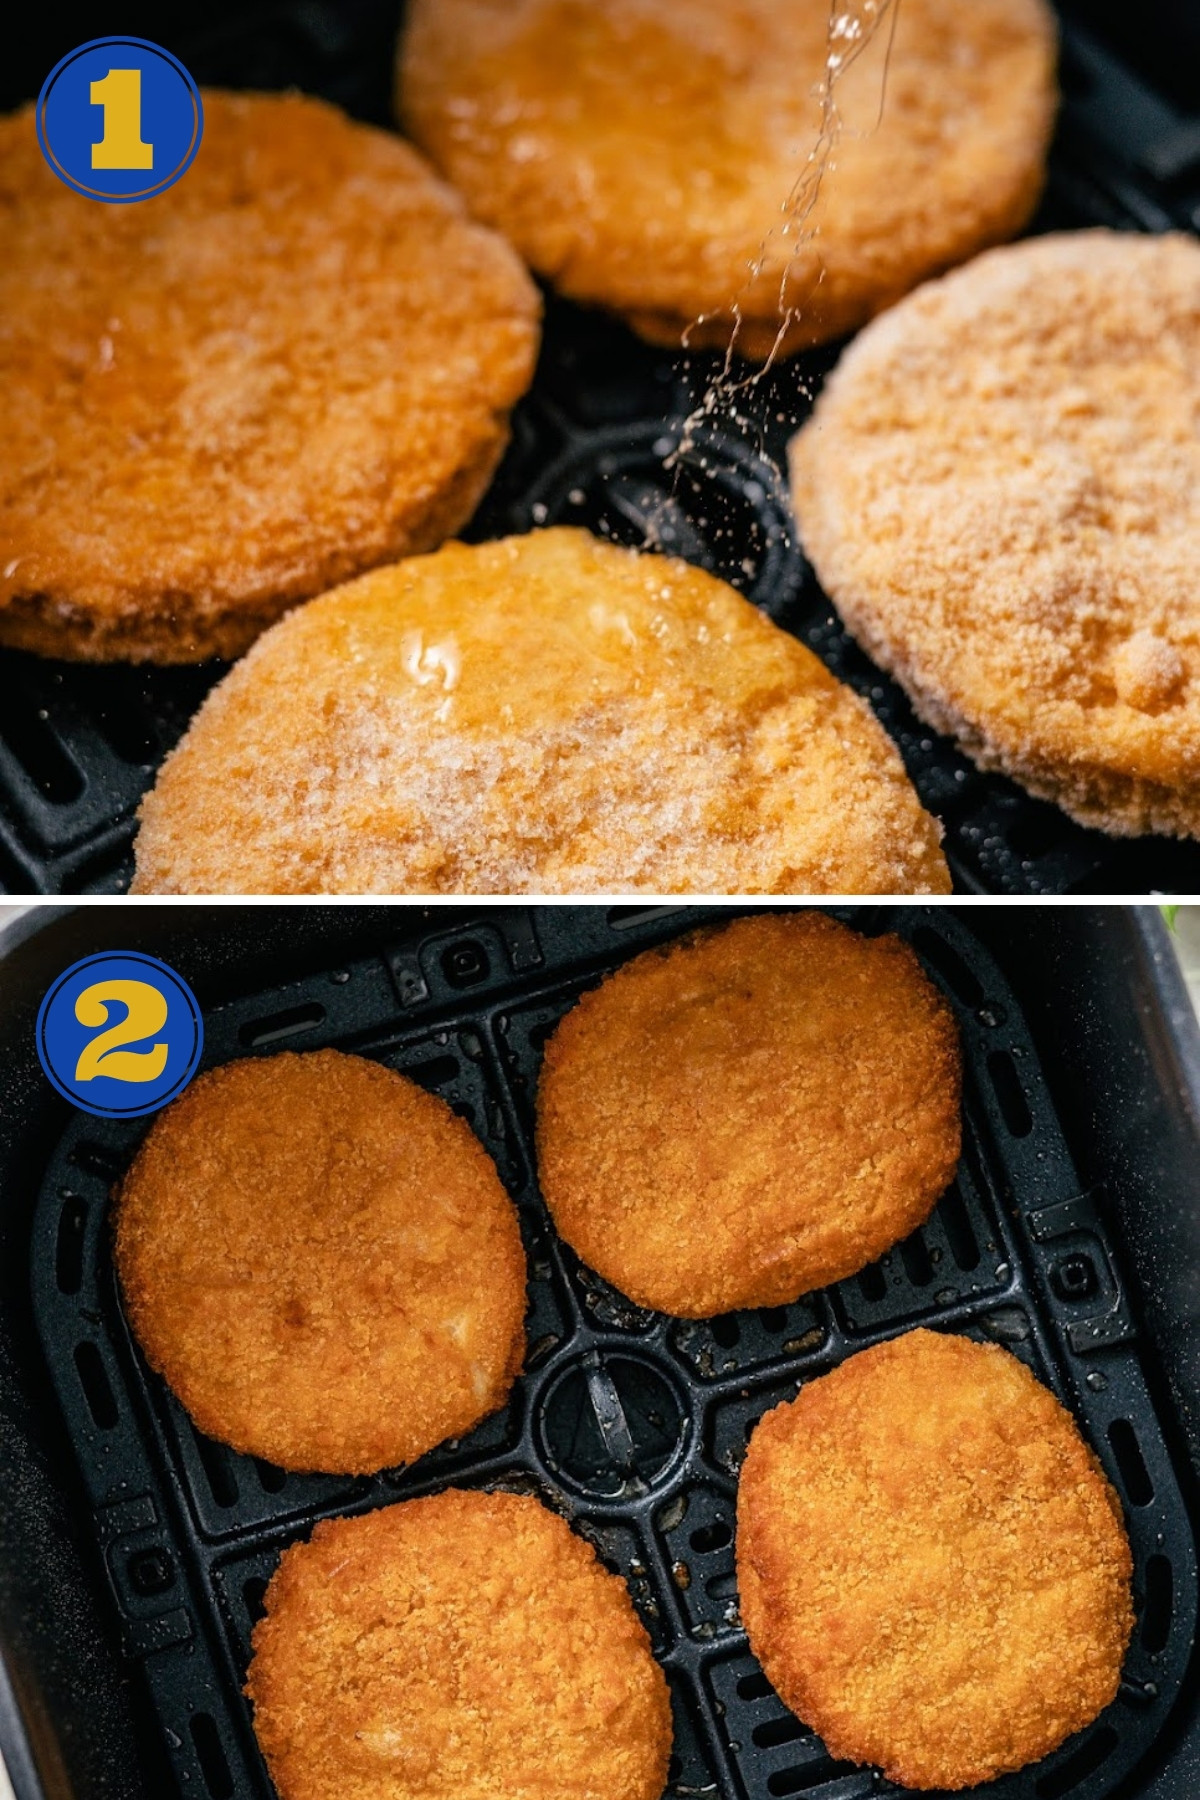 step by step photo tutorial that show the process of cooking frozen chicken patties in an air fryer